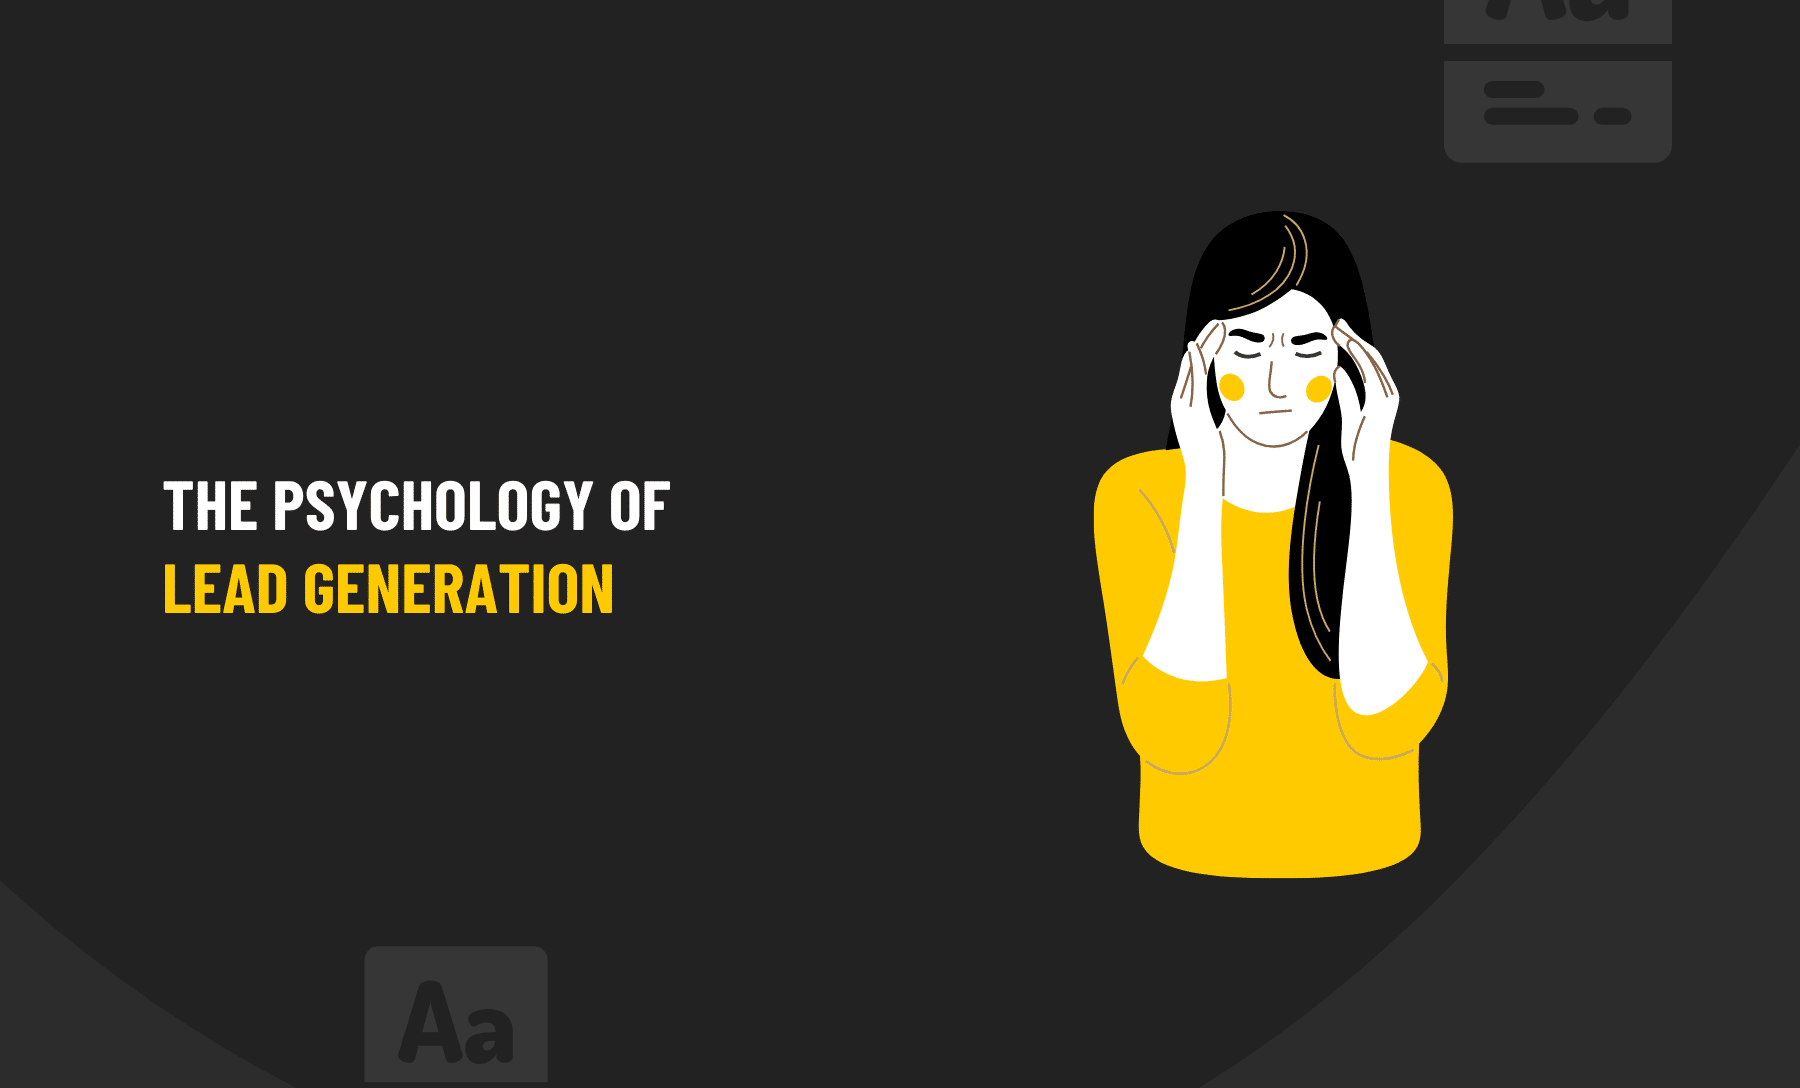 The psychology of lead generation